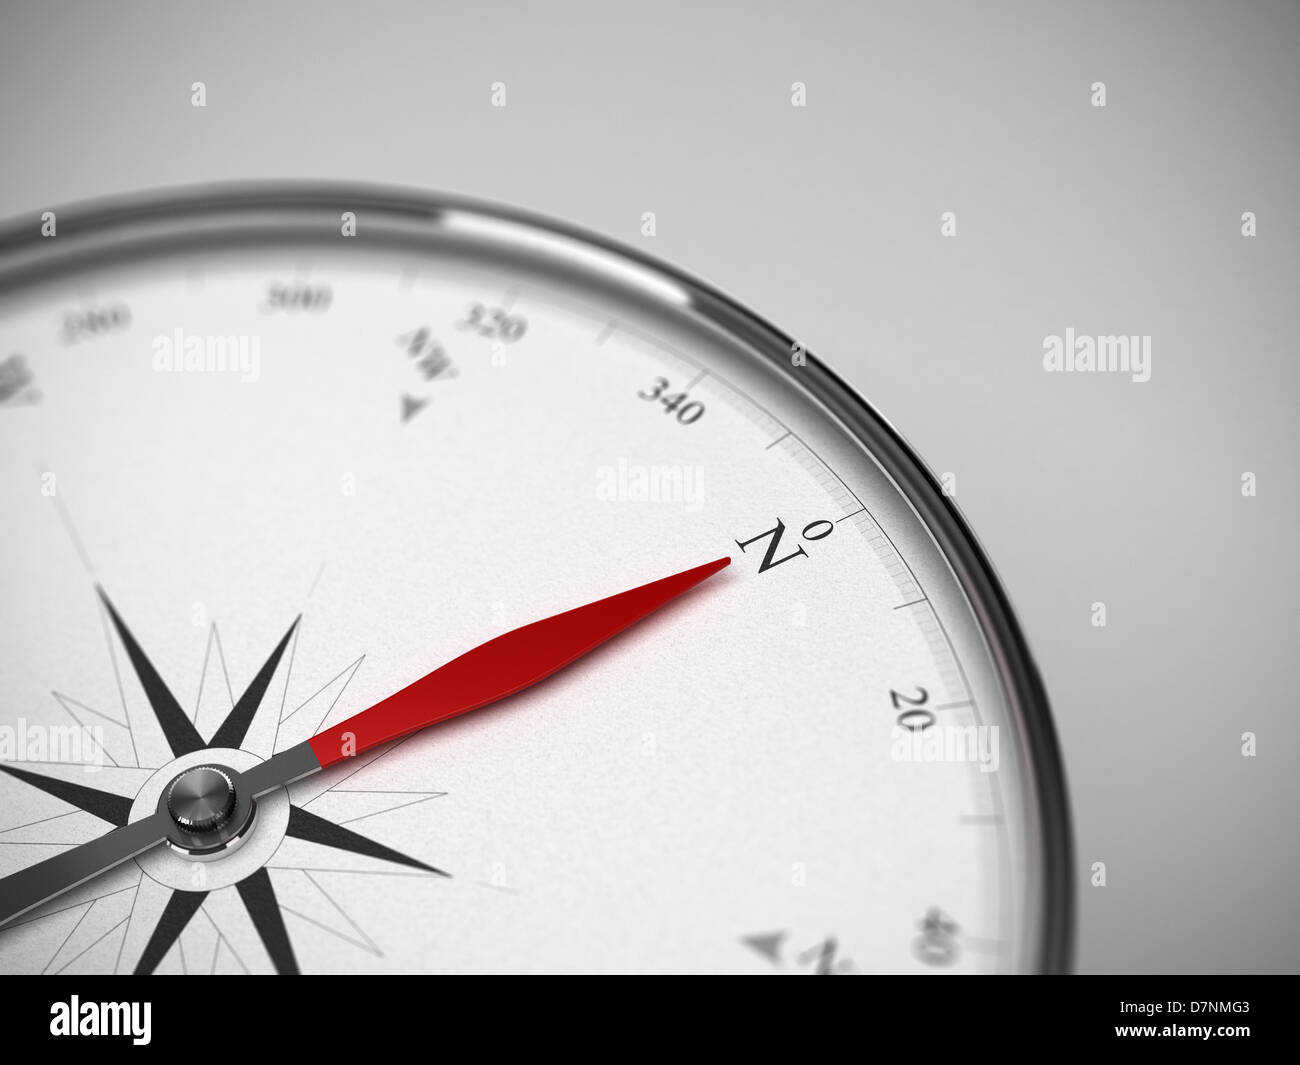 Measure instrument, compass with red needle pointing to the north. Blur effect focus on the letter N. Grey background Stock Photo